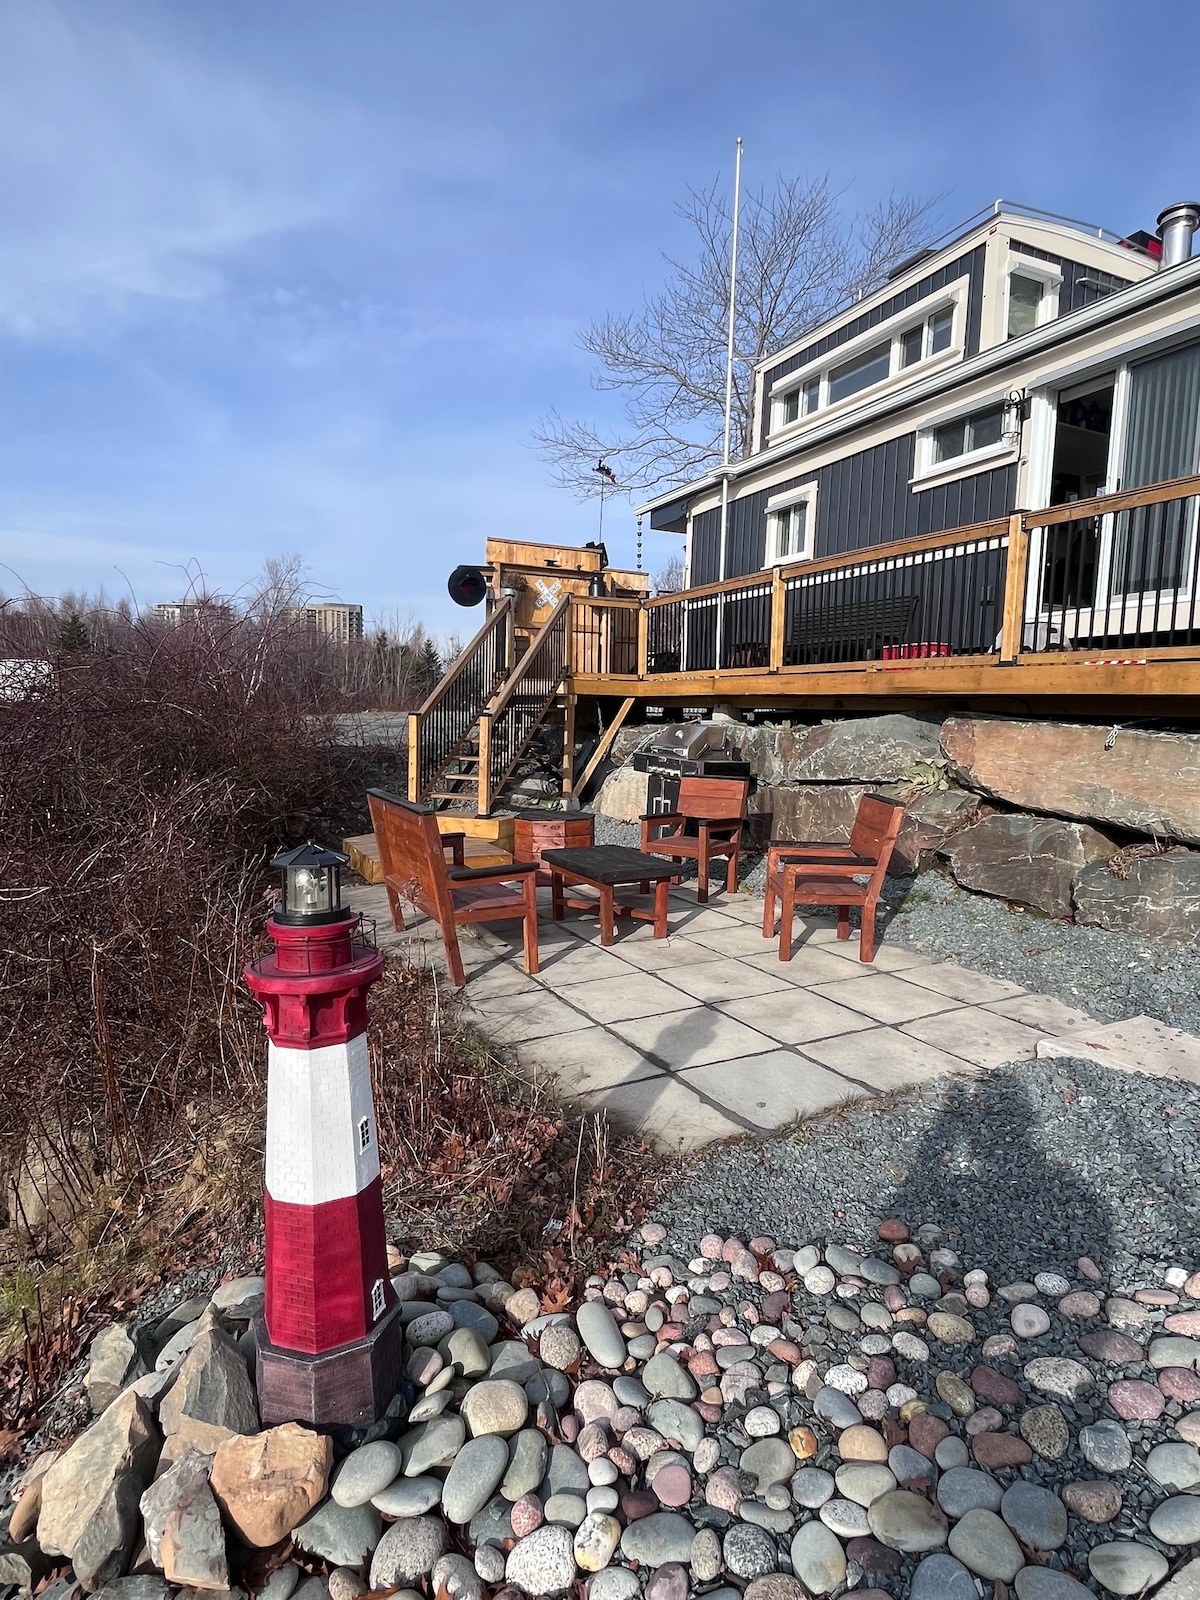 CNR featured Tiny Home Caboose in HRM!